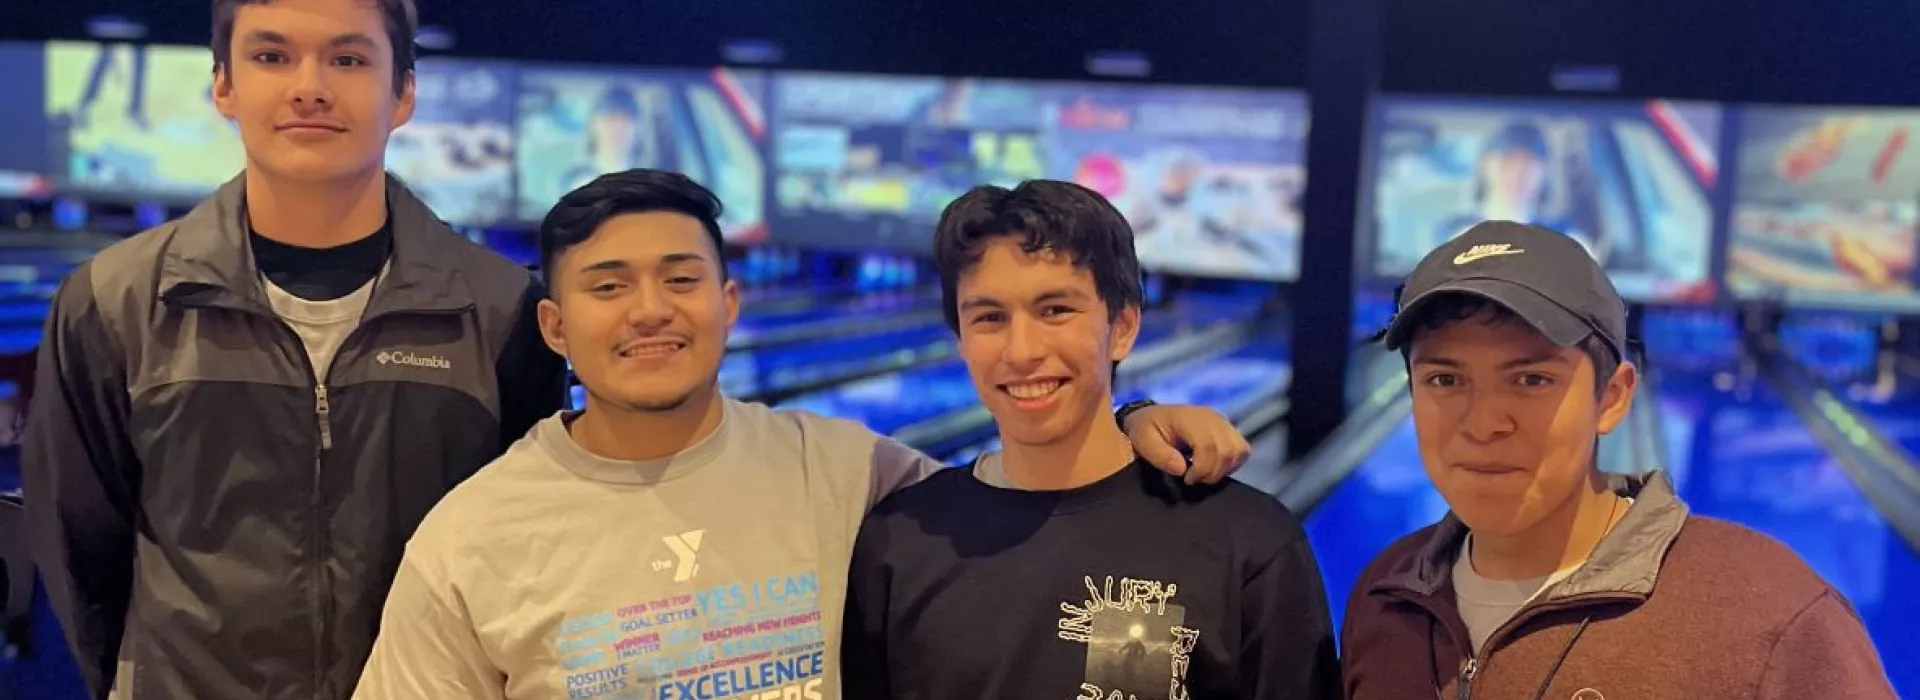 4 male students posing in front of bowling alley